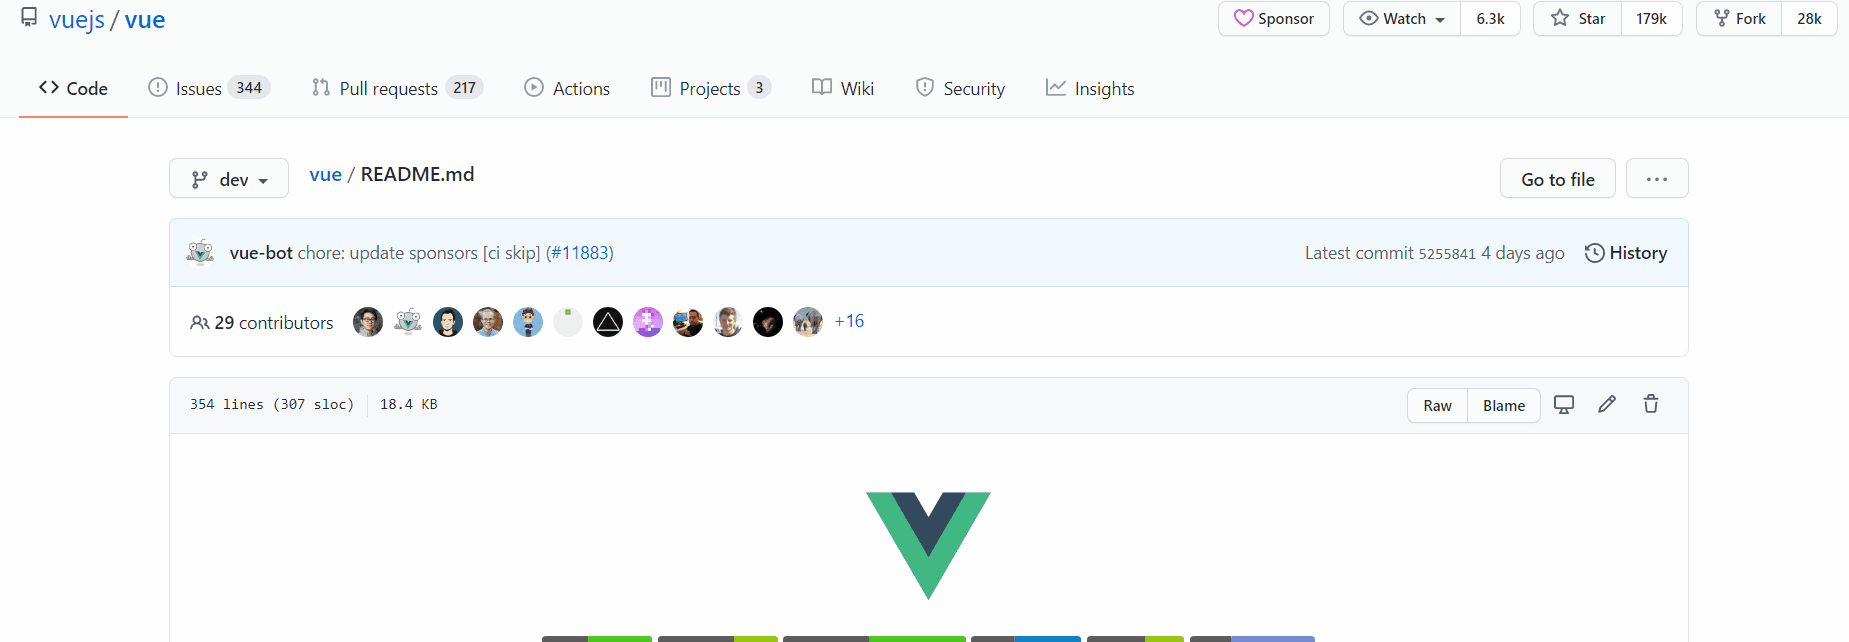 Gif of Vue repository. Source: Author.